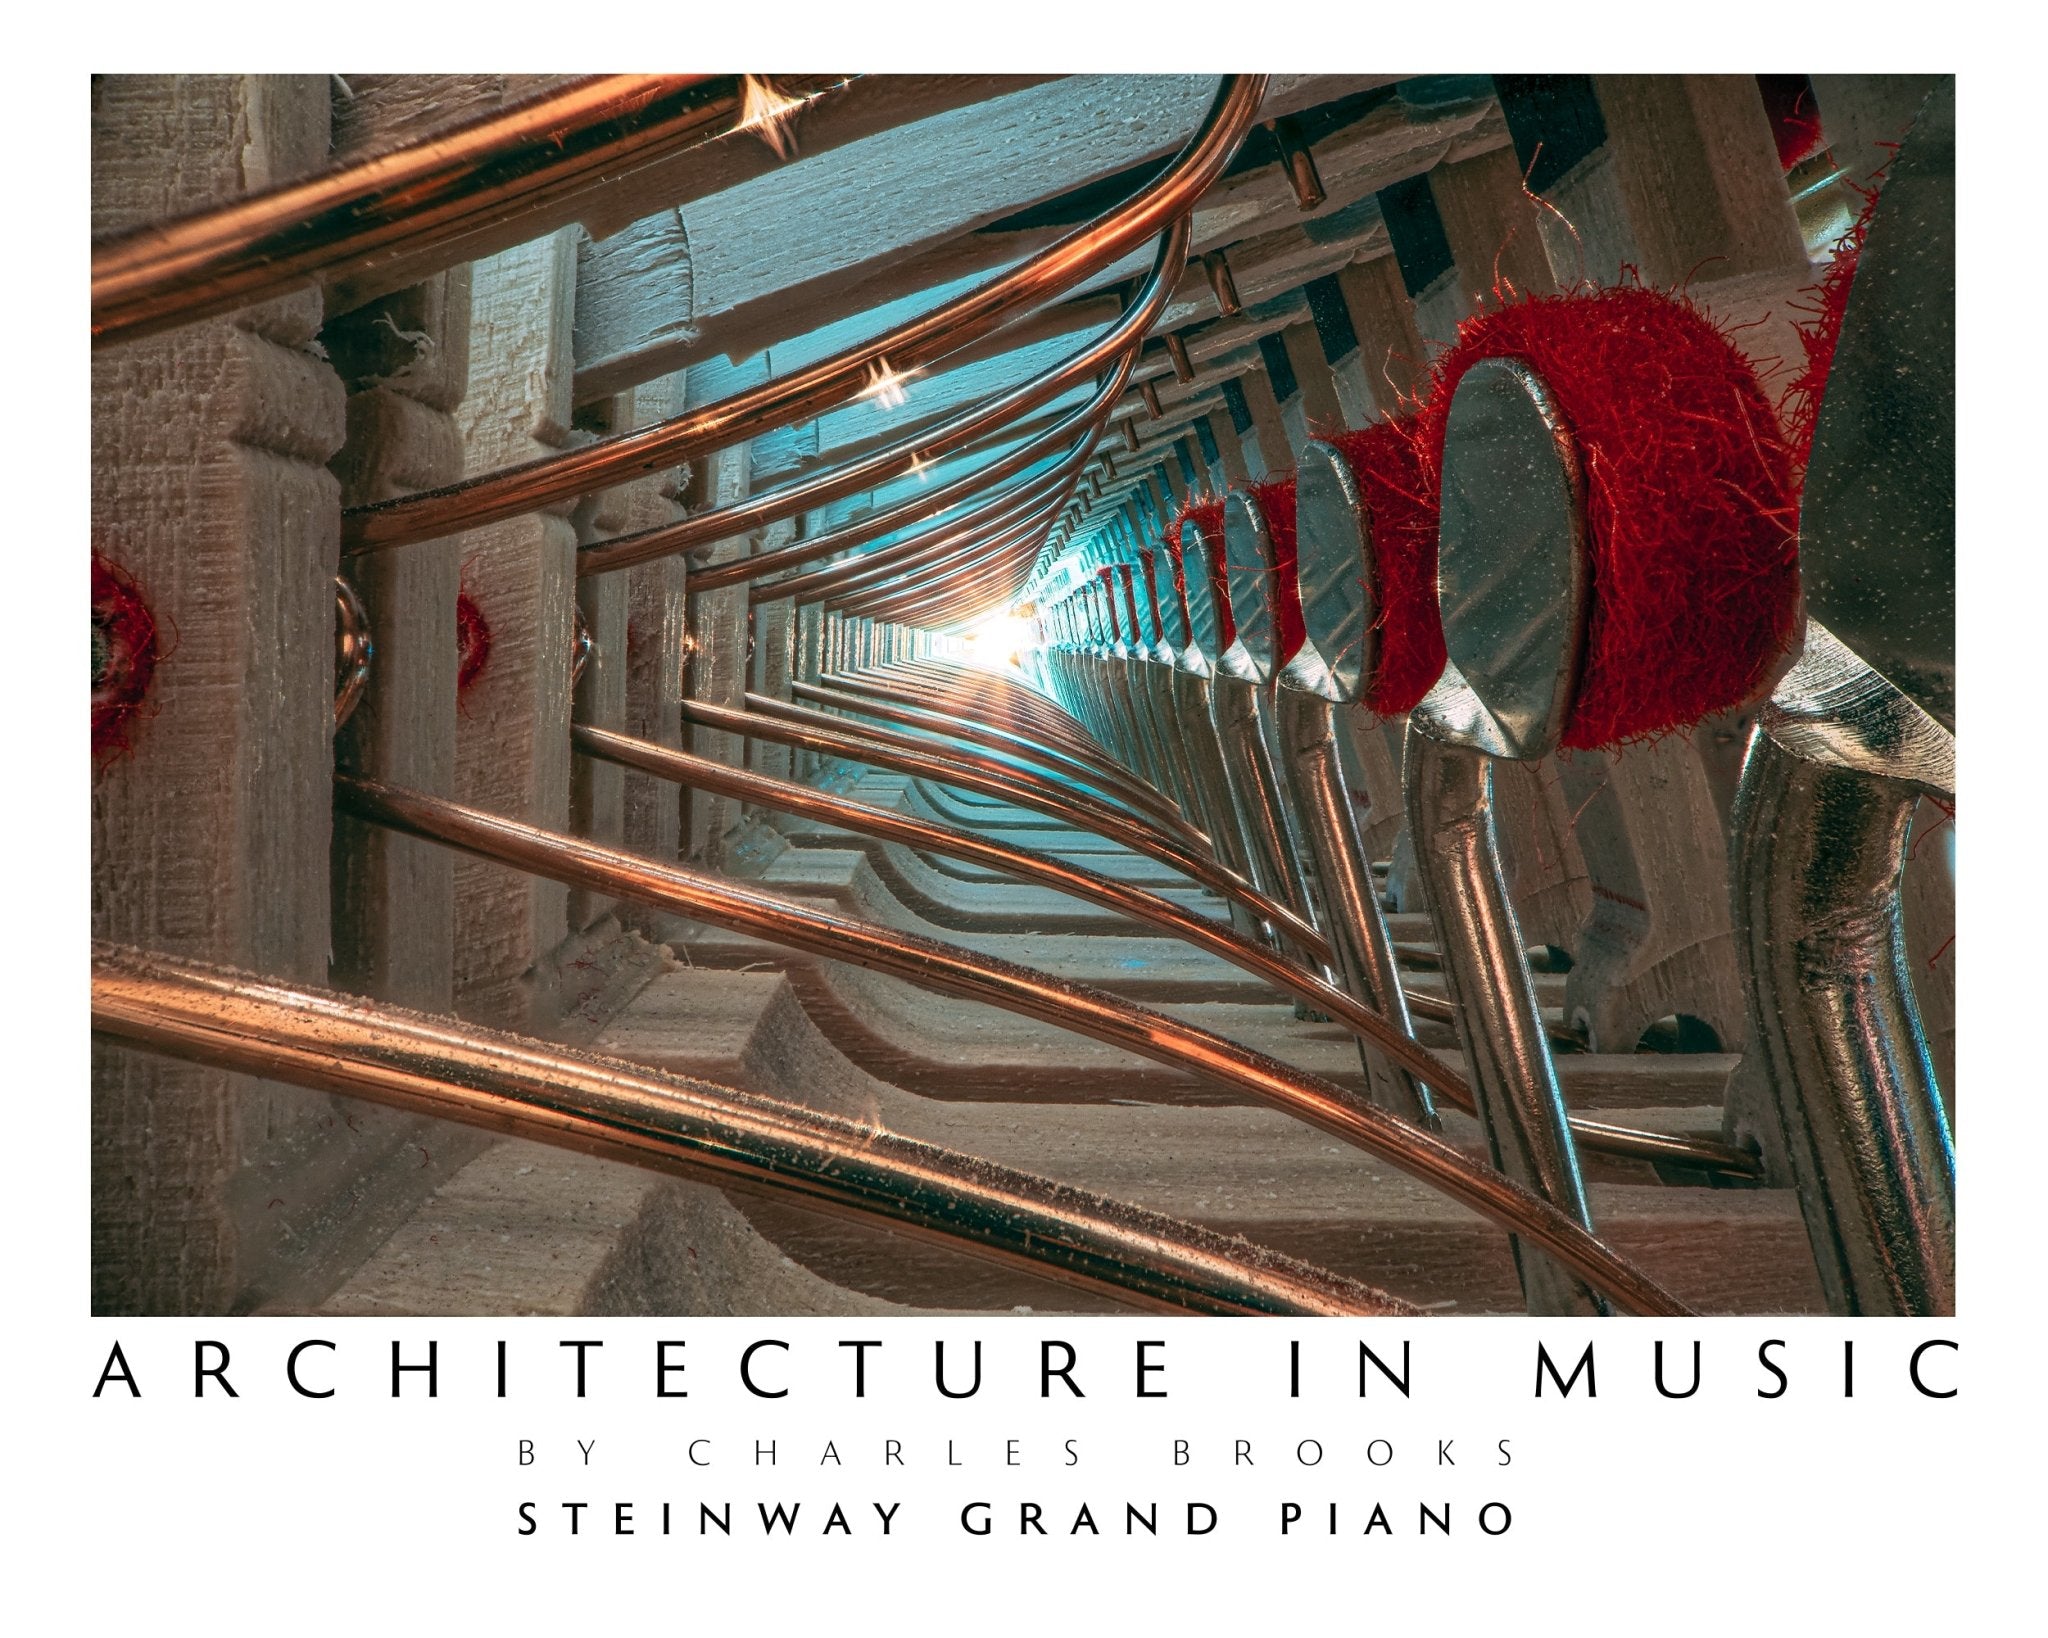 Photo of The Exquisite Architecture of Steinway, Part 1. High Quality Poster. - Giclée Poster Print - Architecture In Music